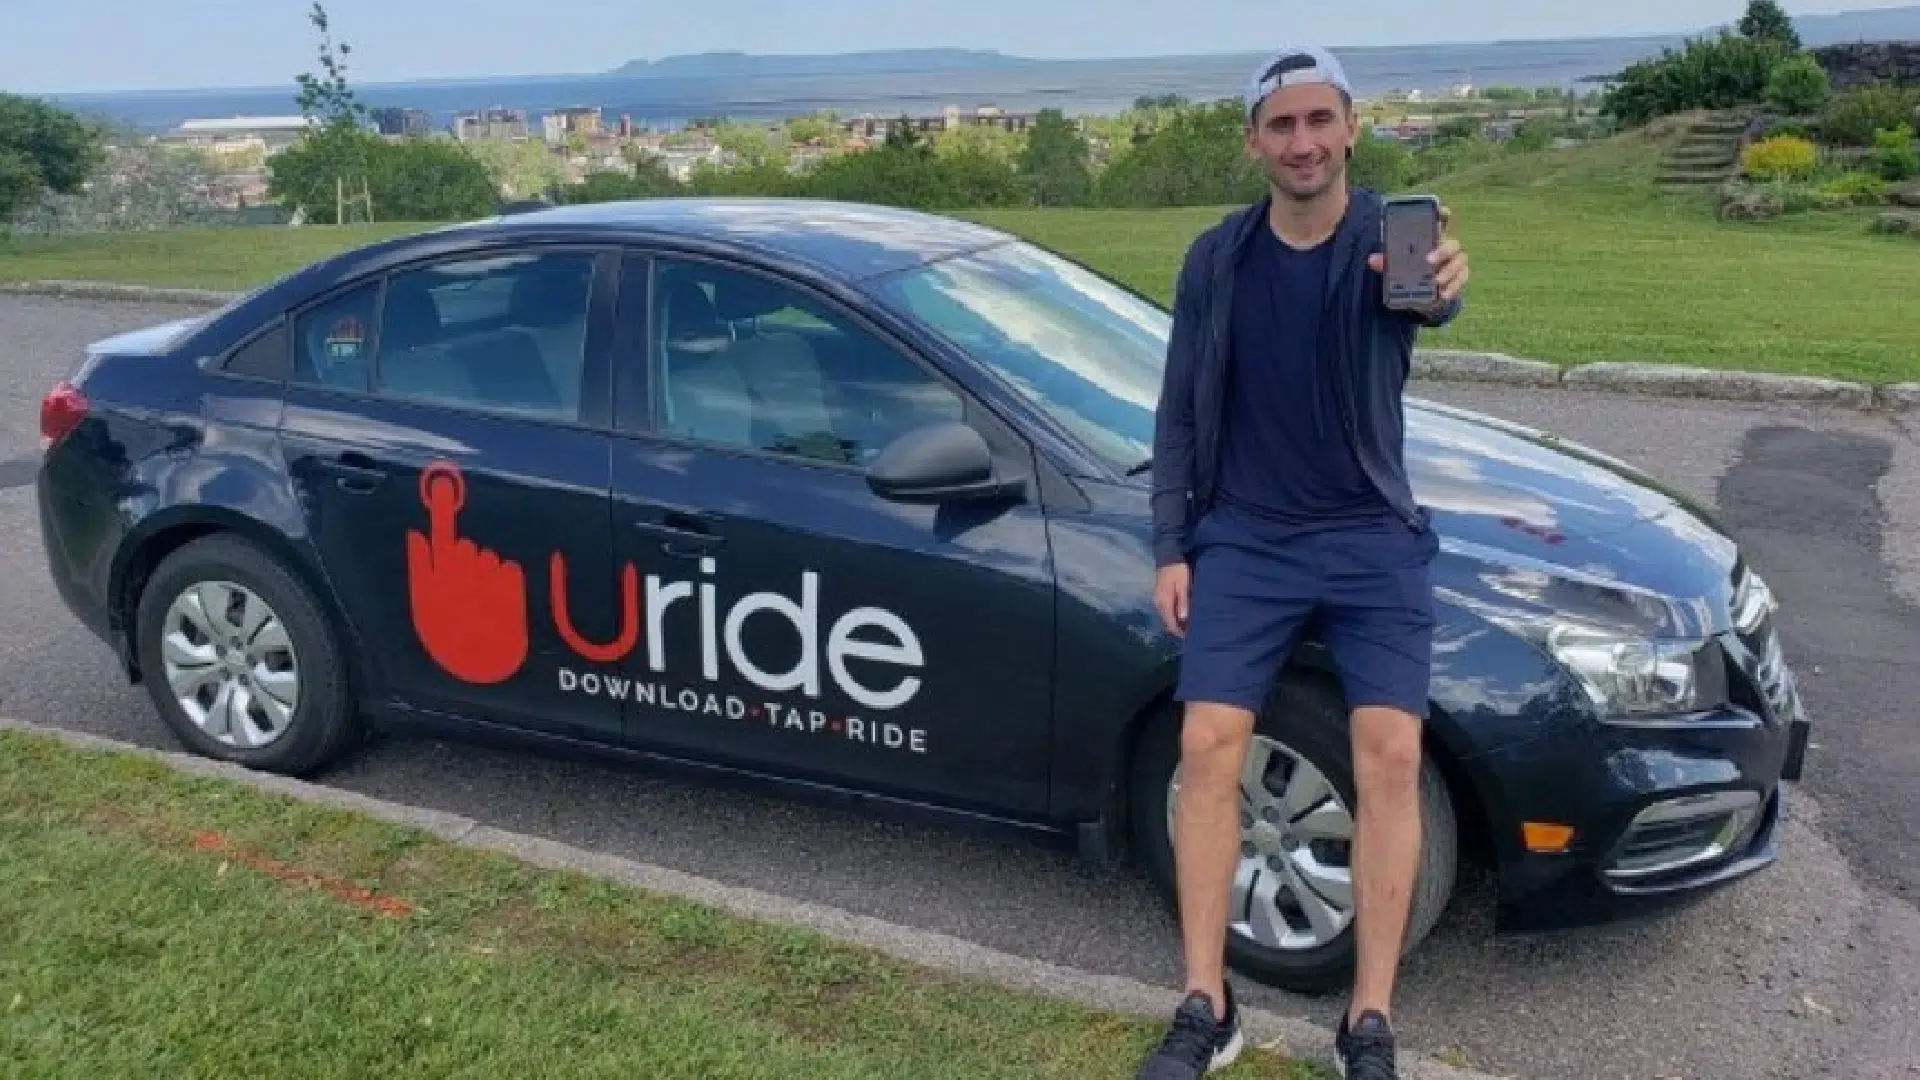 Uride service will now operate in Moncton